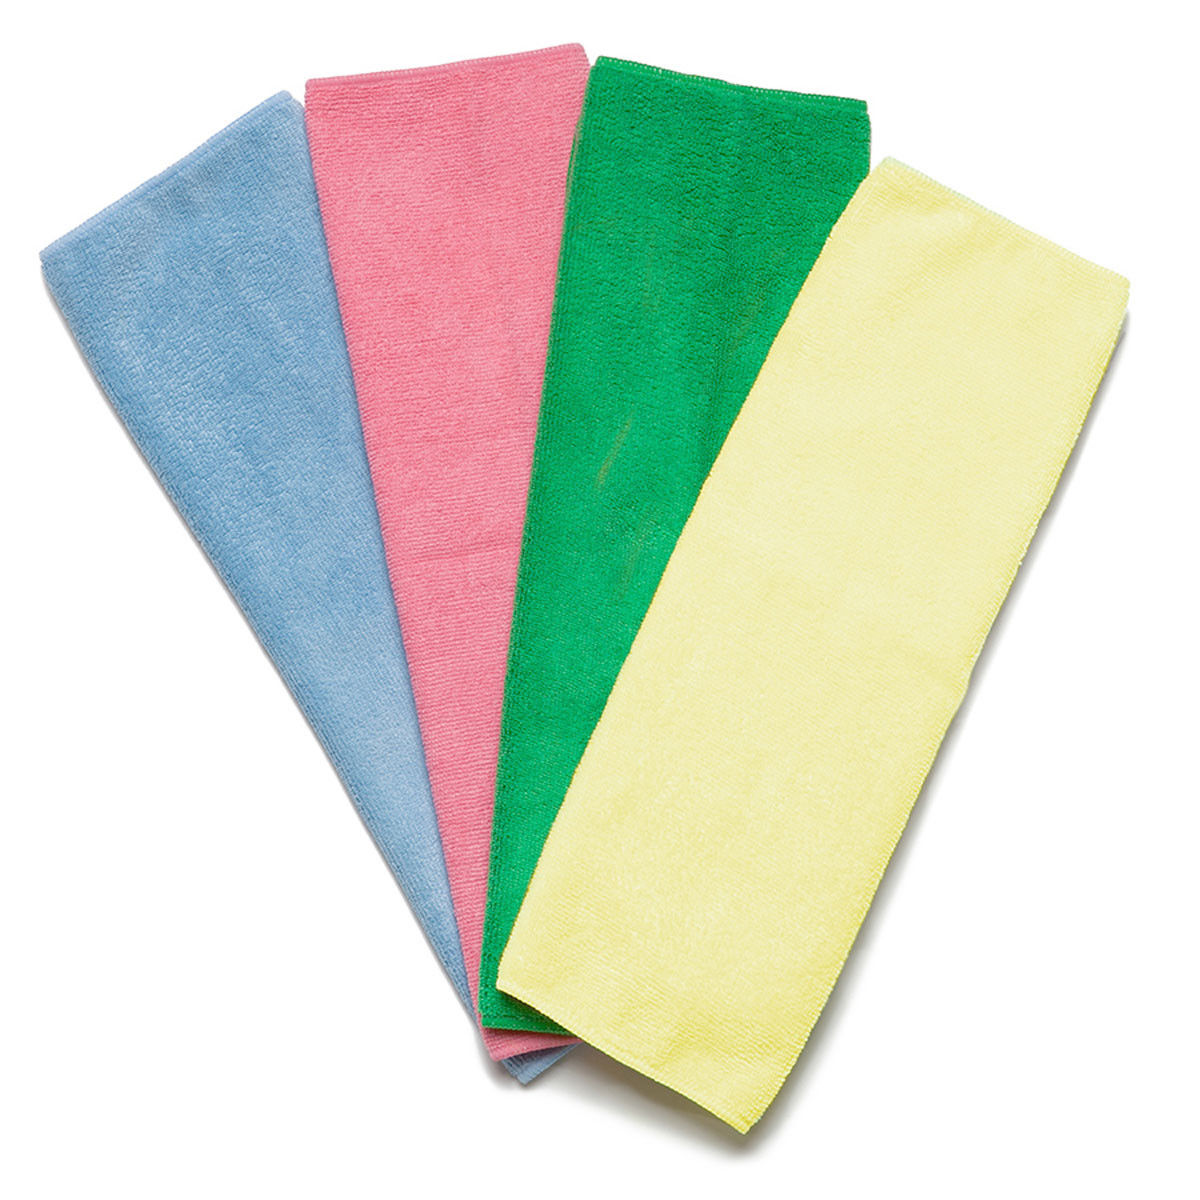 What are the dimensions of these microfiber cleaning towels?